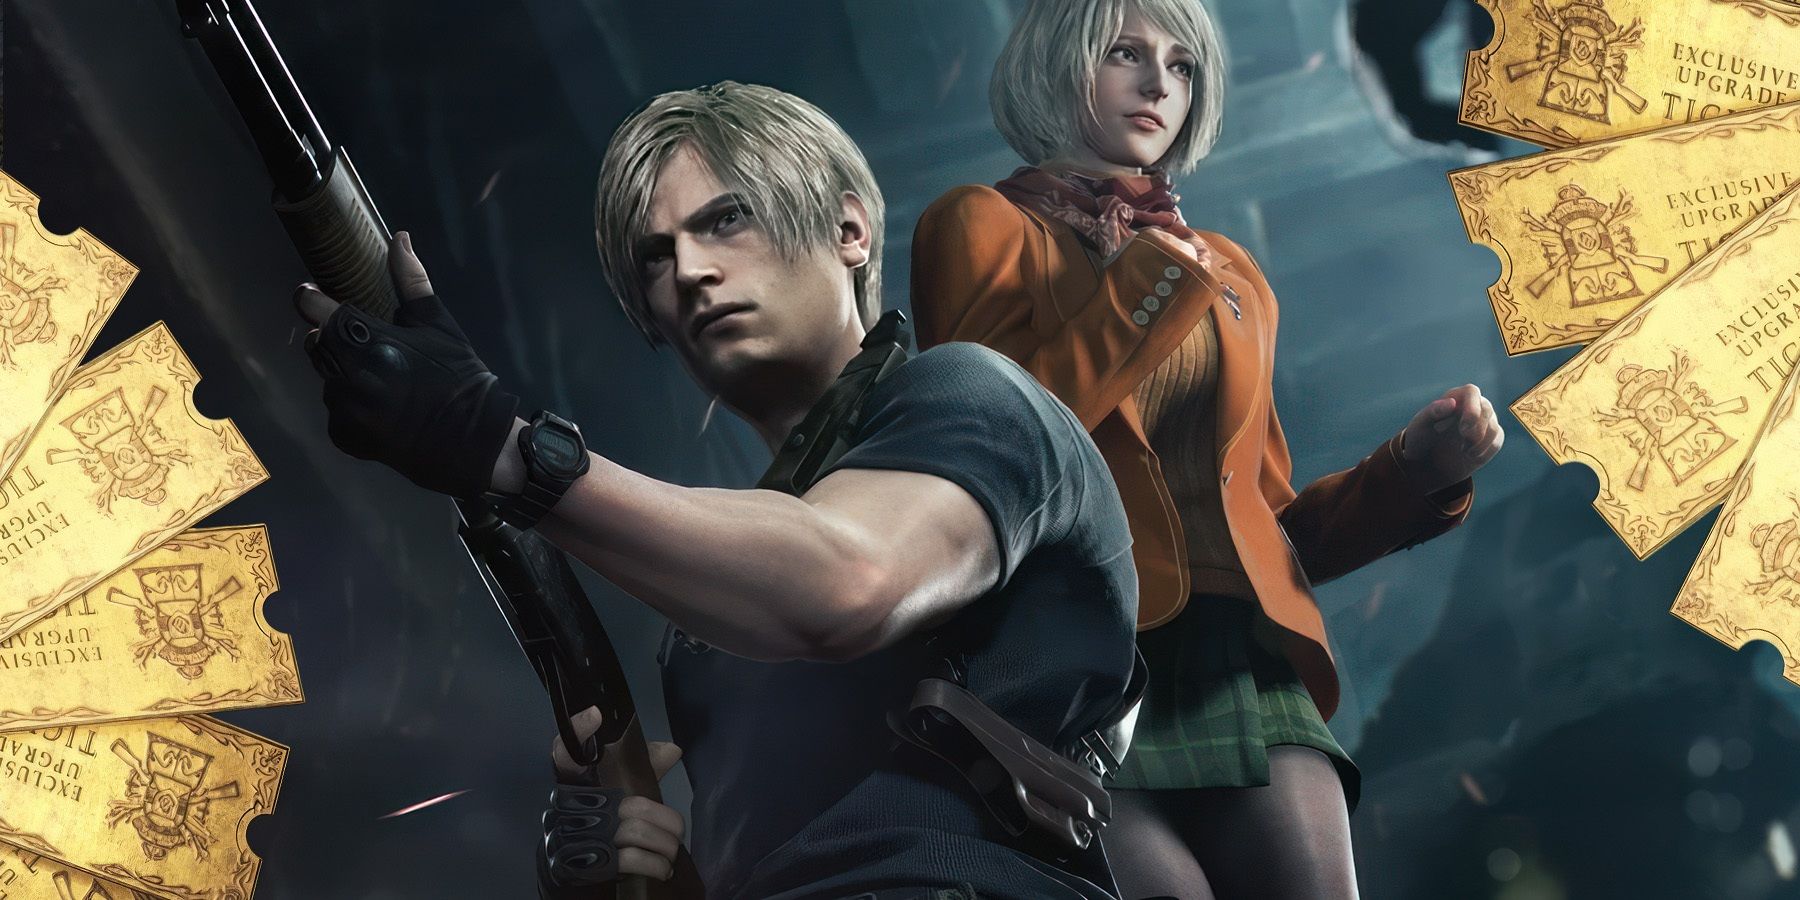 Resident Evil 4 on PS4 will come with free PS5 upgrade at launch